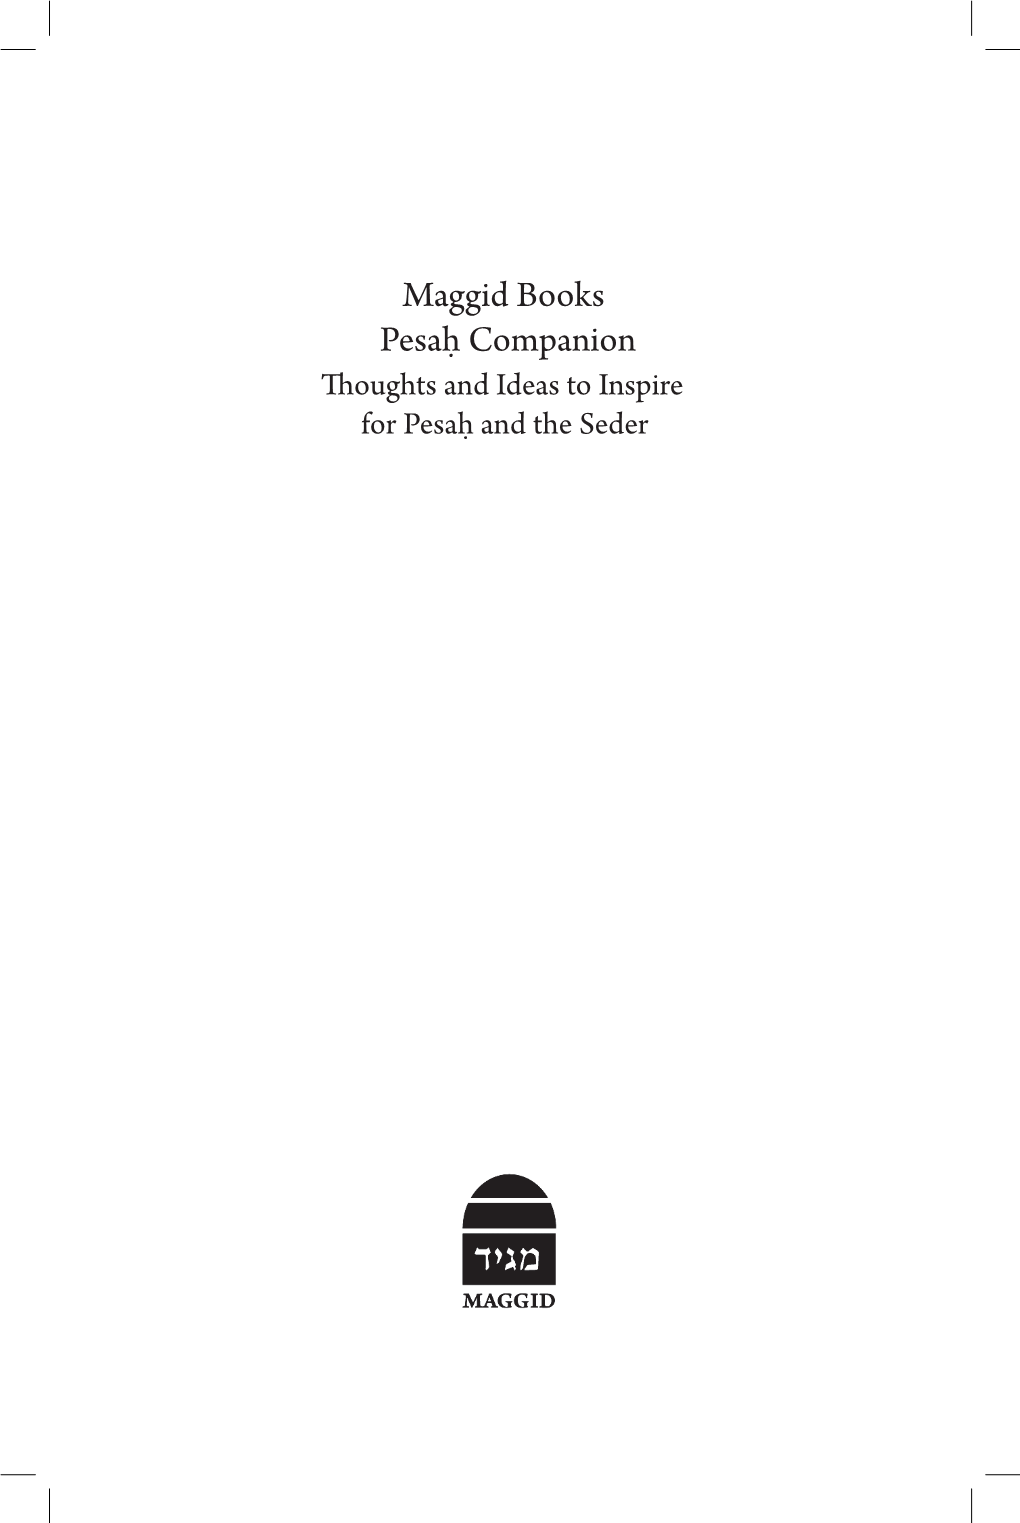 Maggid Books Pesaĥ Companion Thoughts and Ideas to Inspire for Pesaĥ and the Seder